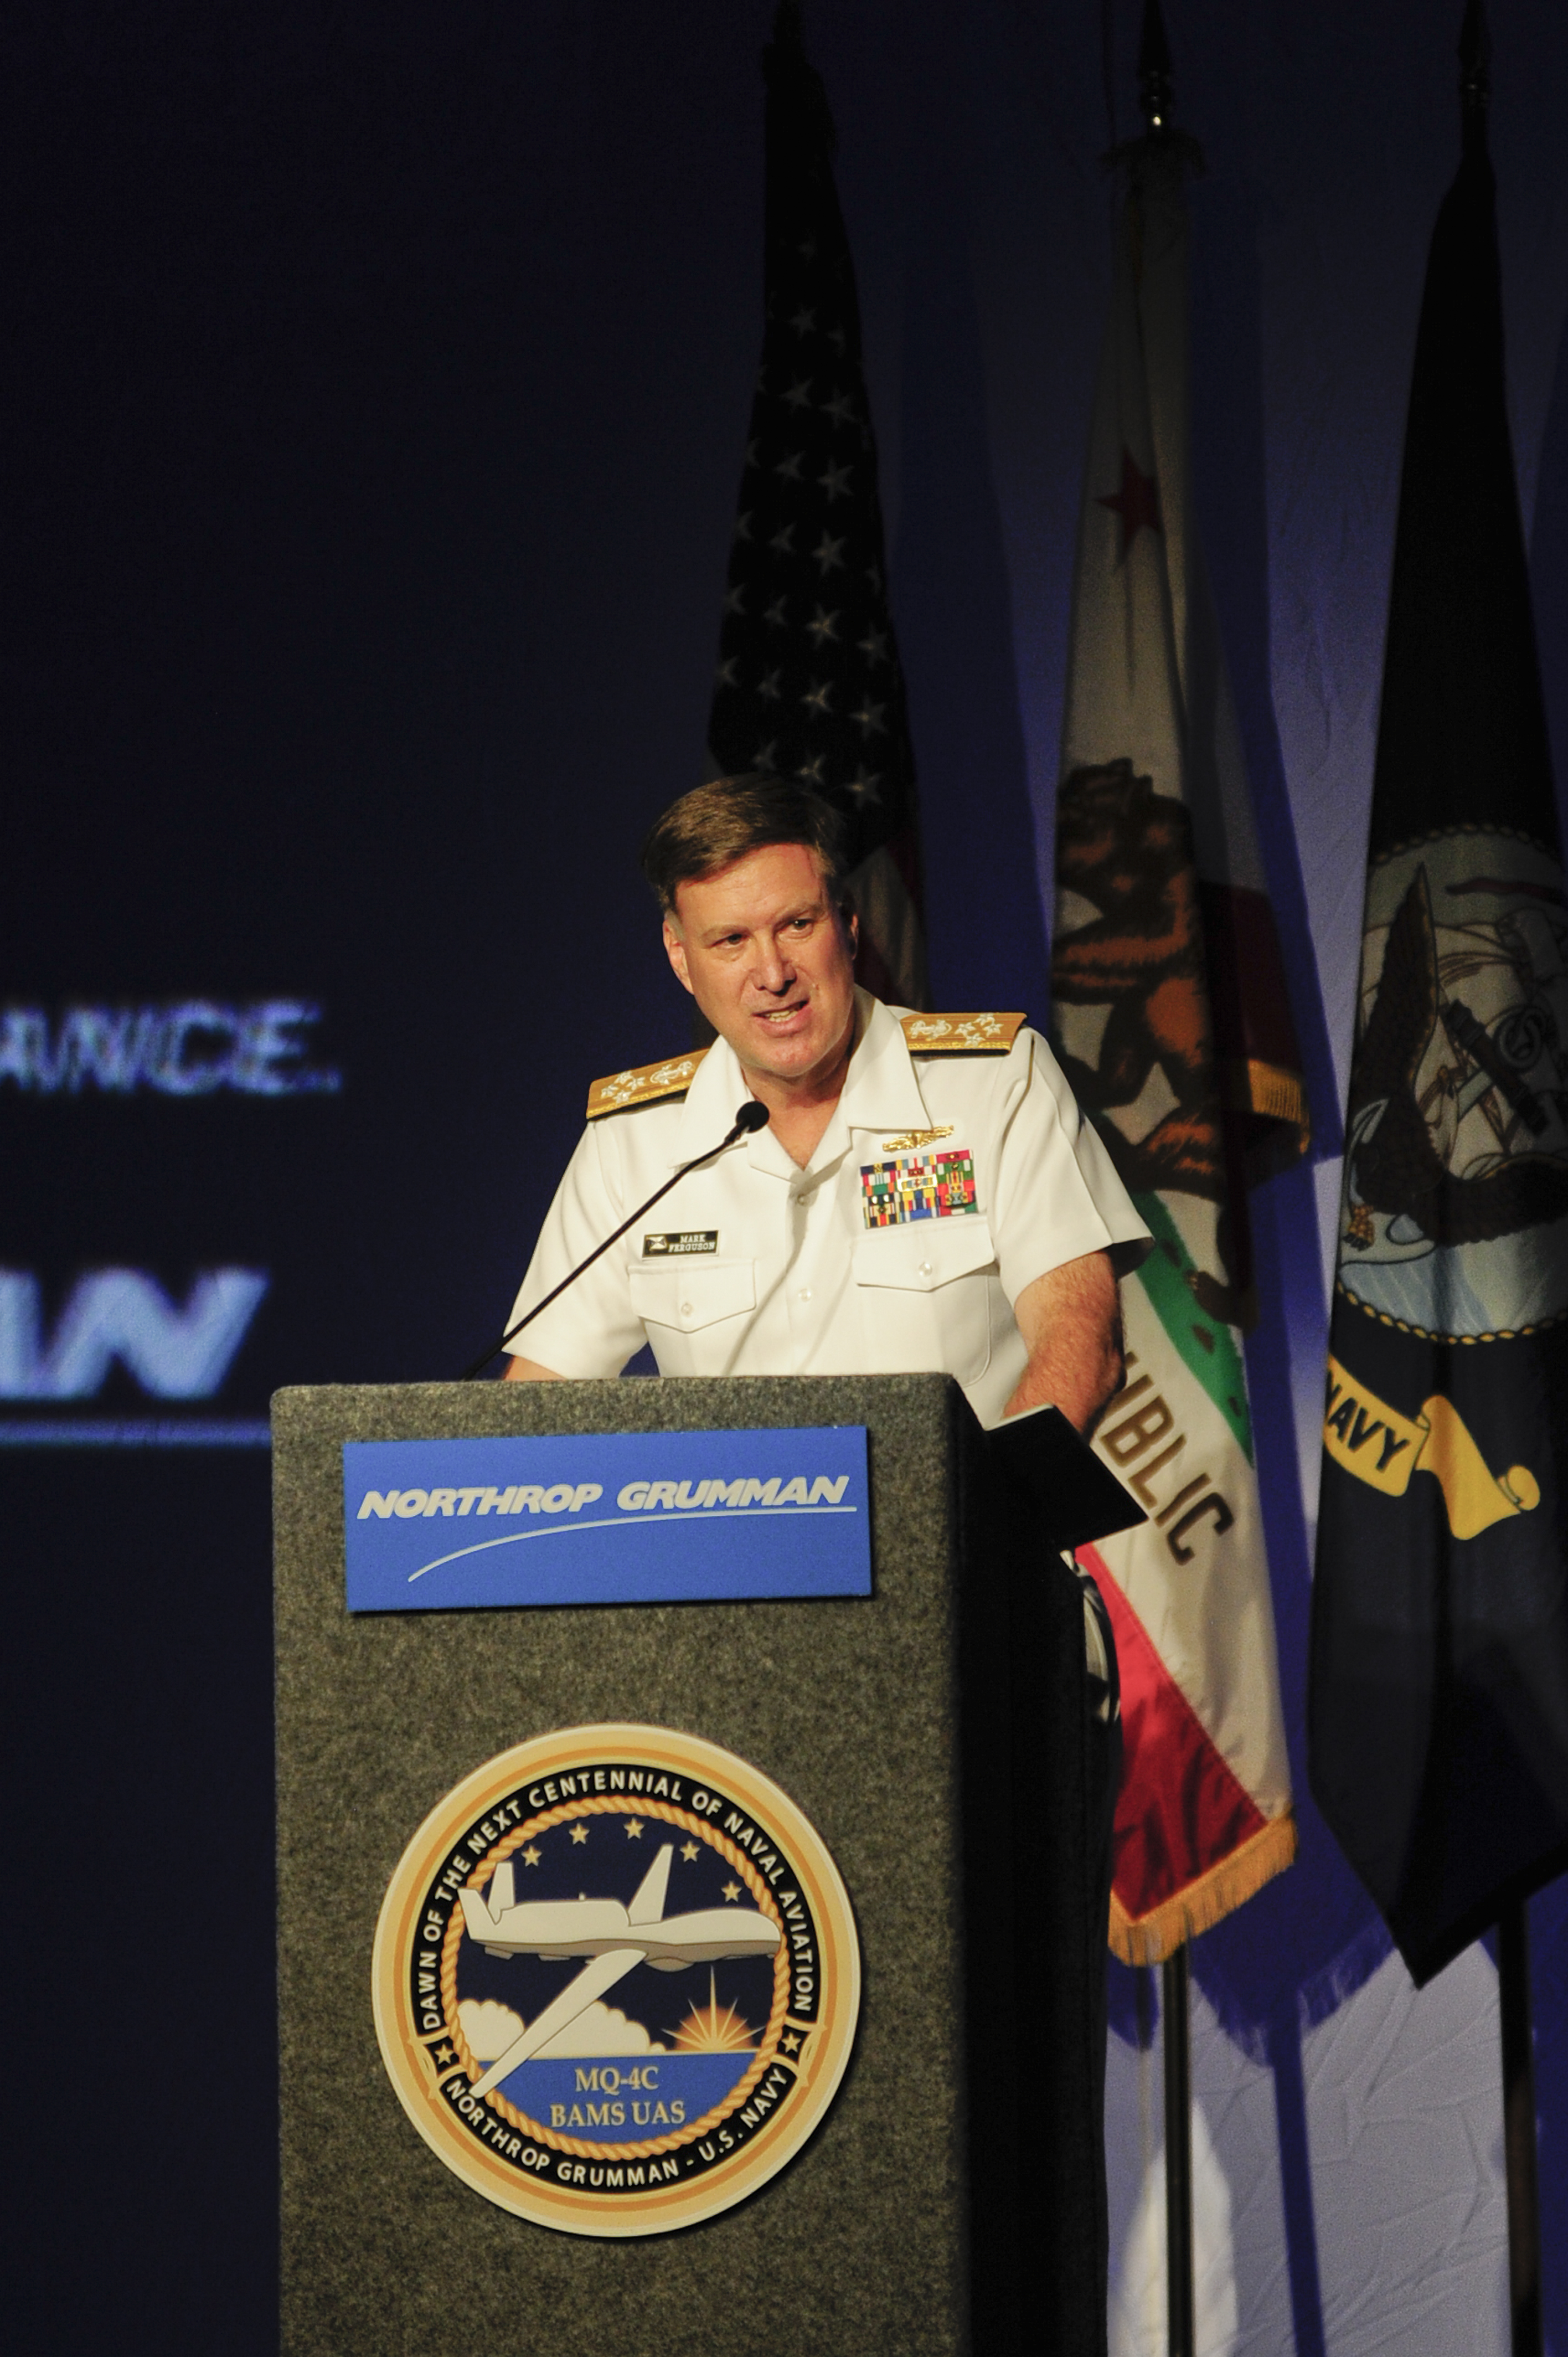 Flickr - Official U.S. Navy Imagery - The Vice Chief of Naval Operations delivers remarks at the unveiling of the U.S. Navy MQ-4C Broad Area Maritime Surveillance unmanned aircraft system.